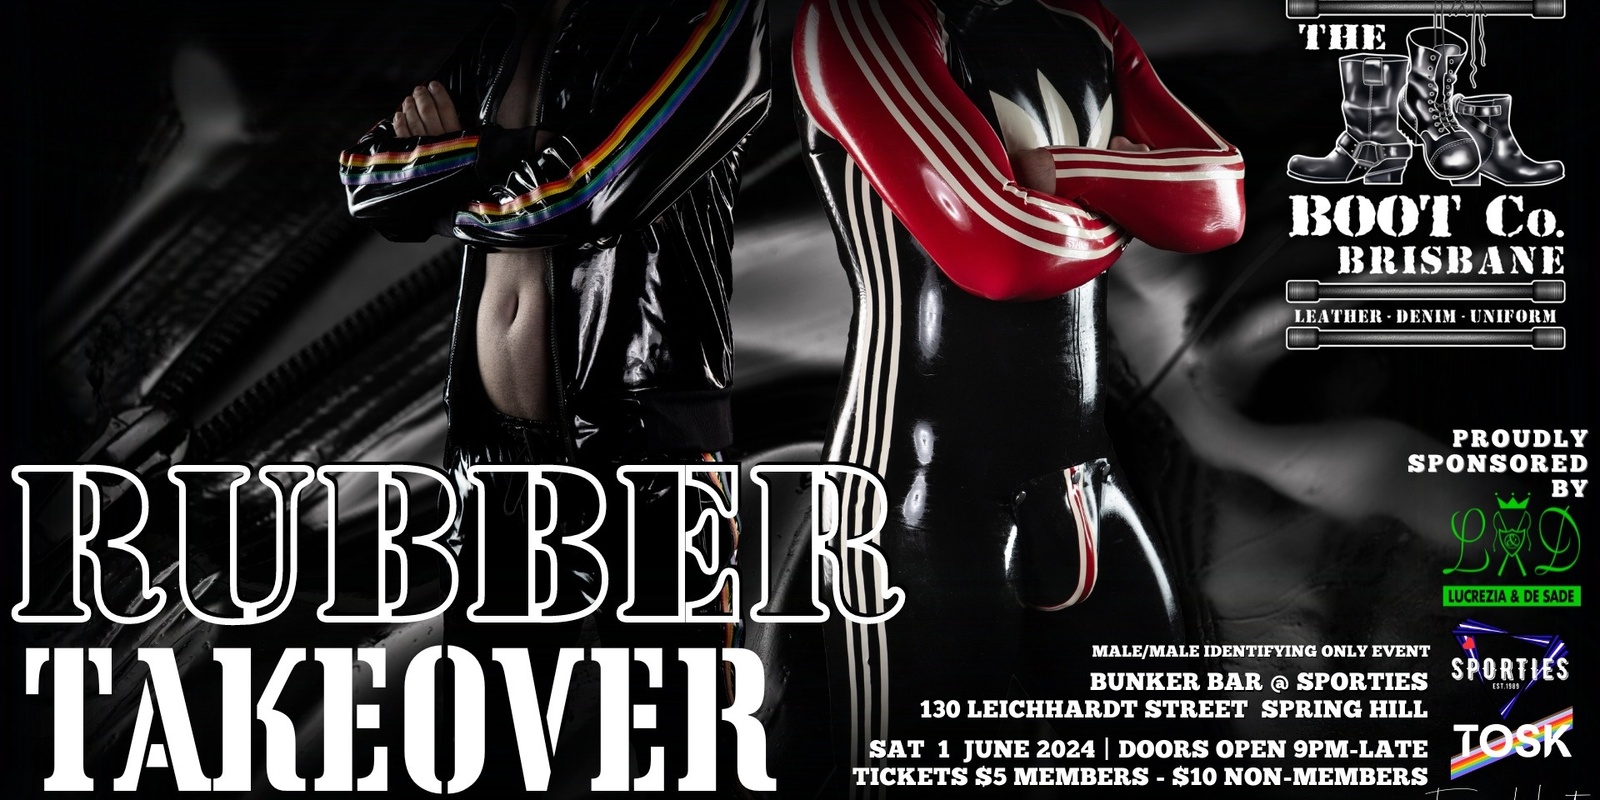 Banner image for BootCo Presents: Rubber Takeover